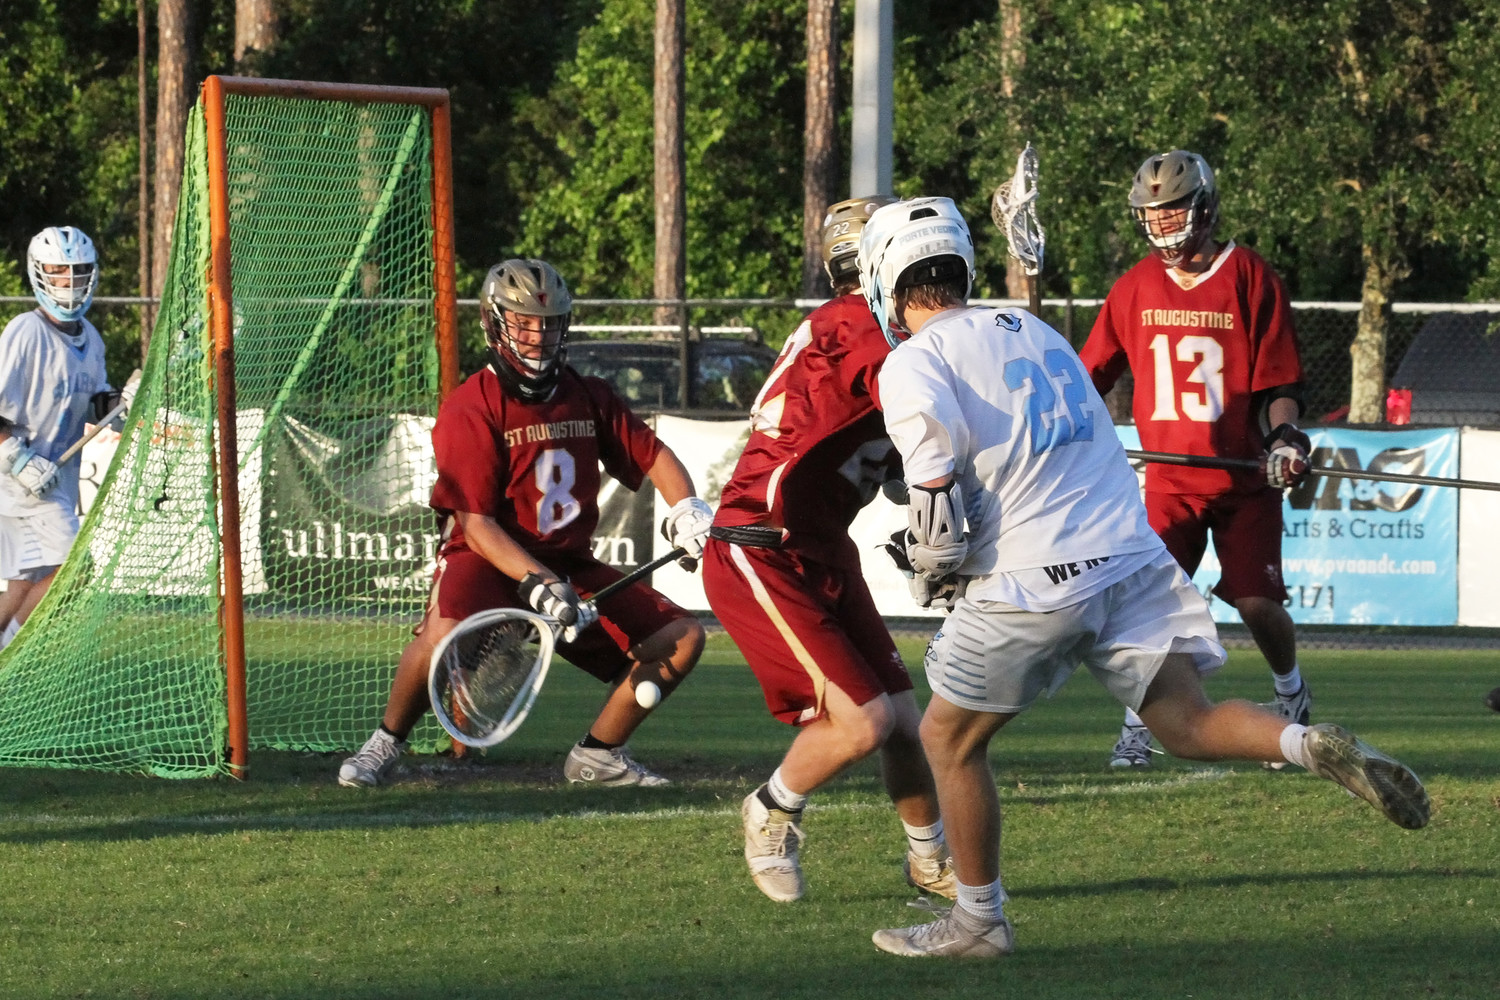 Ponte Vedra’s Carter Parlette shoots low at the St. Augustin goal.